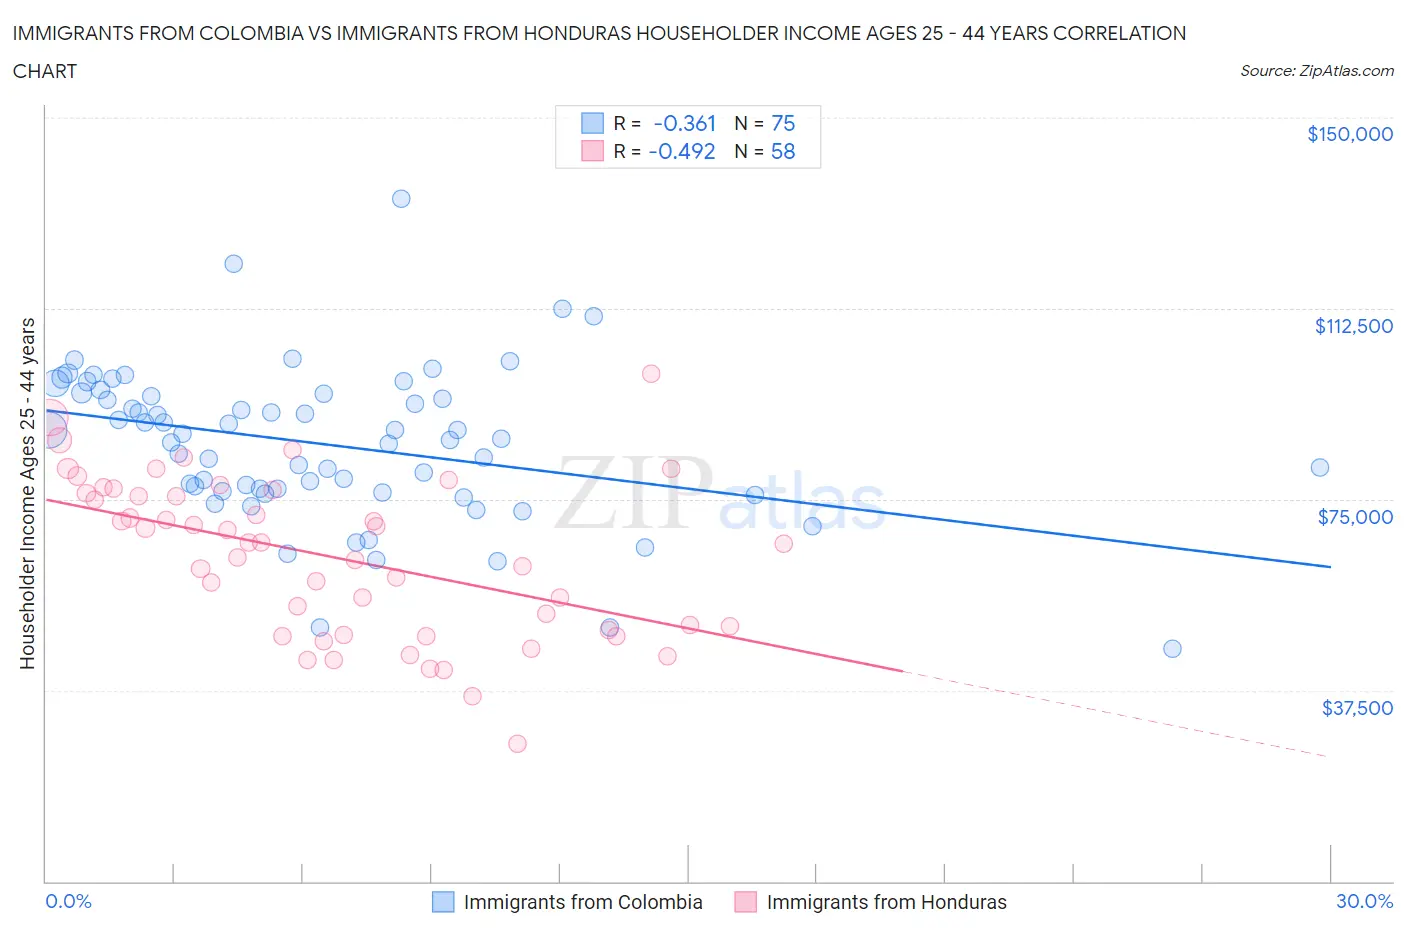 Immigrants from Colombia vs Immigrants from Honduras Householder Income Ages 25 - 44 years